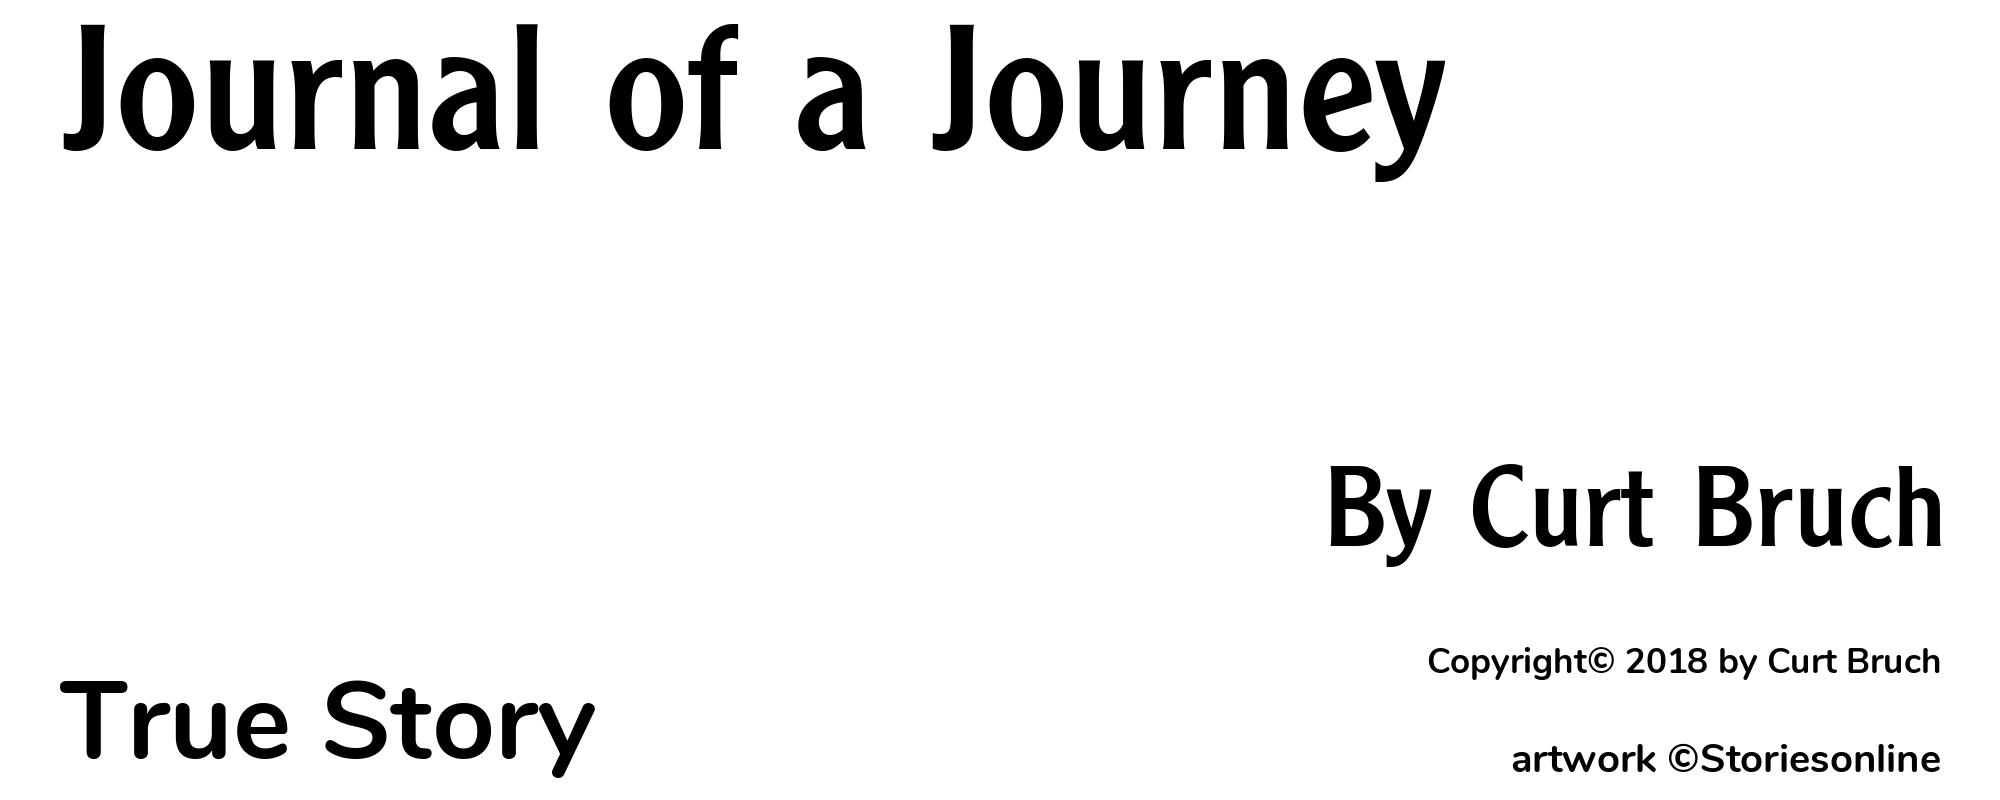 Journal of a Journey - Cover